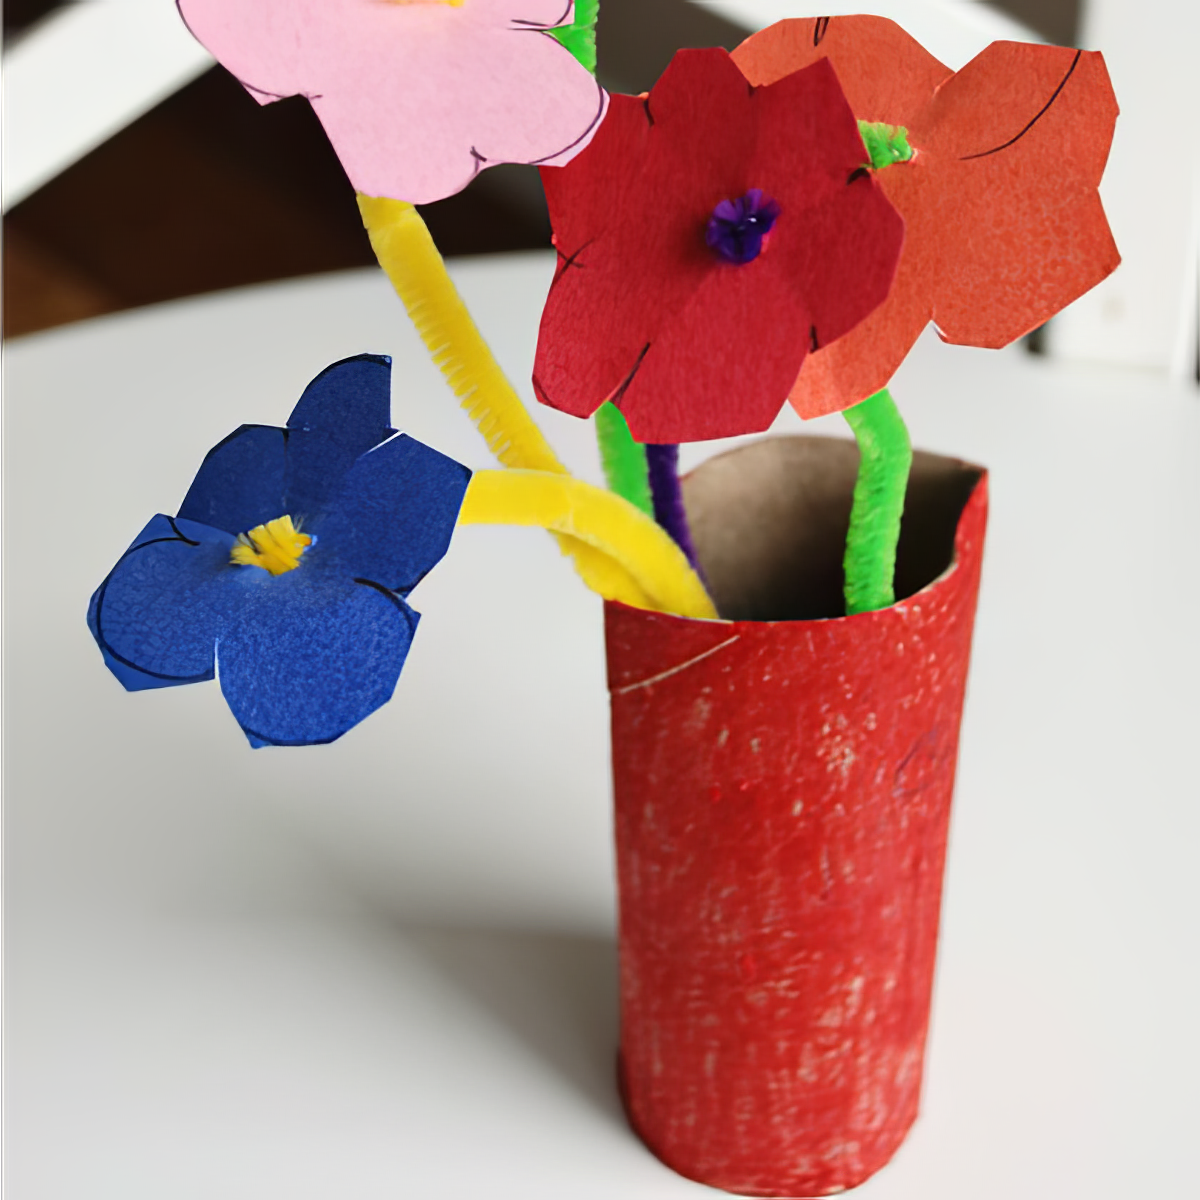 pipecleaner flowers upcycled vase using toilet paper rolls and colored papers